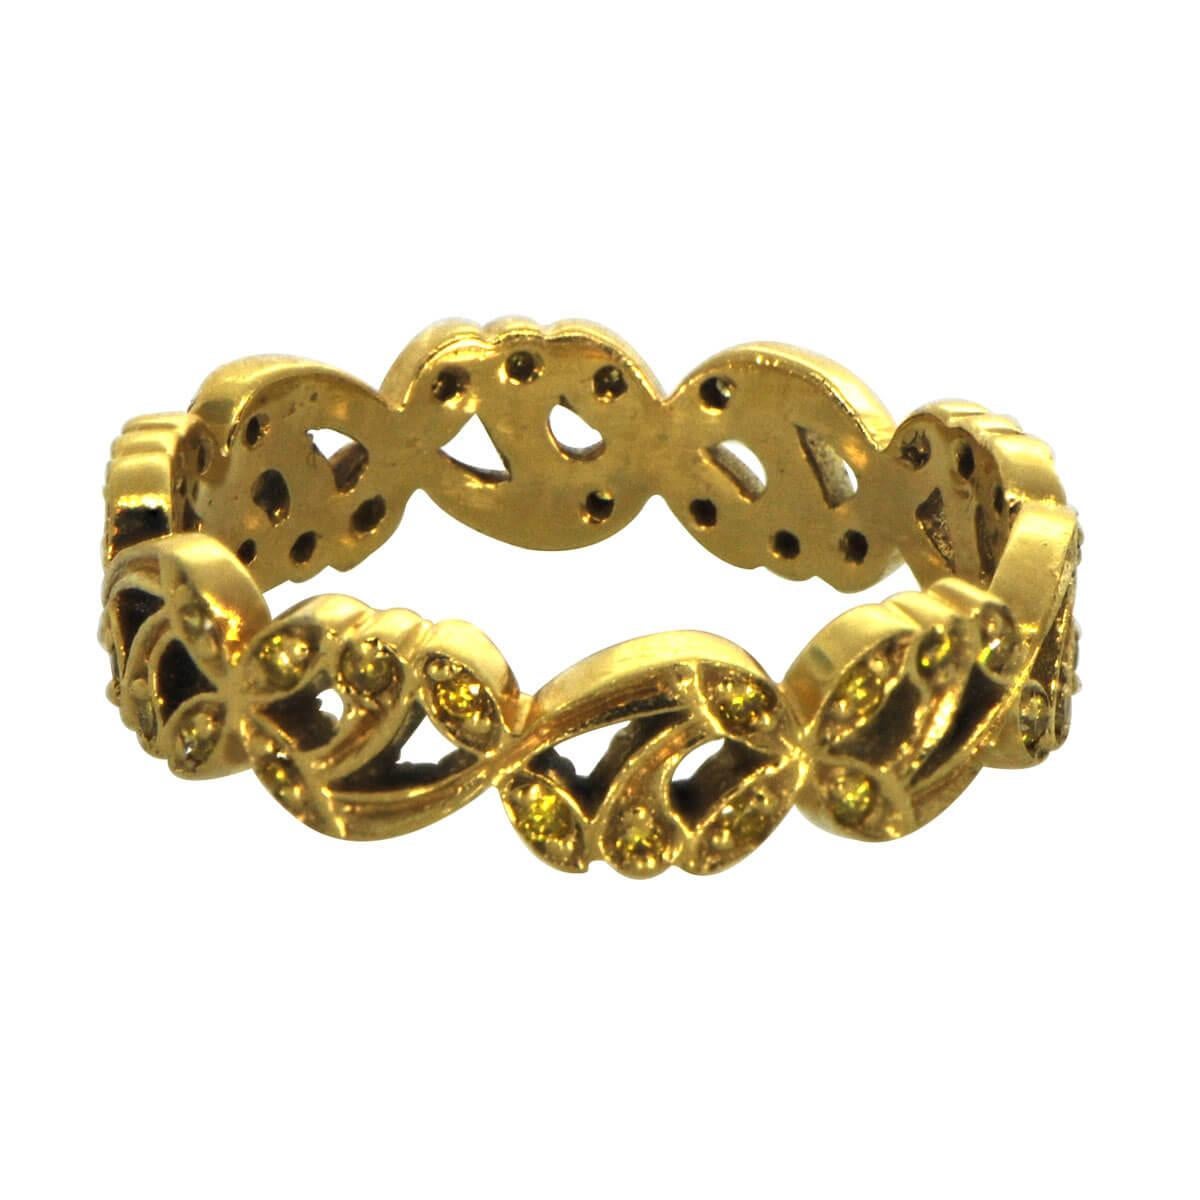 A stunning 18k yellow gold band featuring an intricate openwork floral design. The band is adorned with full-cut yellow diamonds set in an eternity setting, with a total diamond weight of approximately 0.40 carats. This exquisite band boasts a width